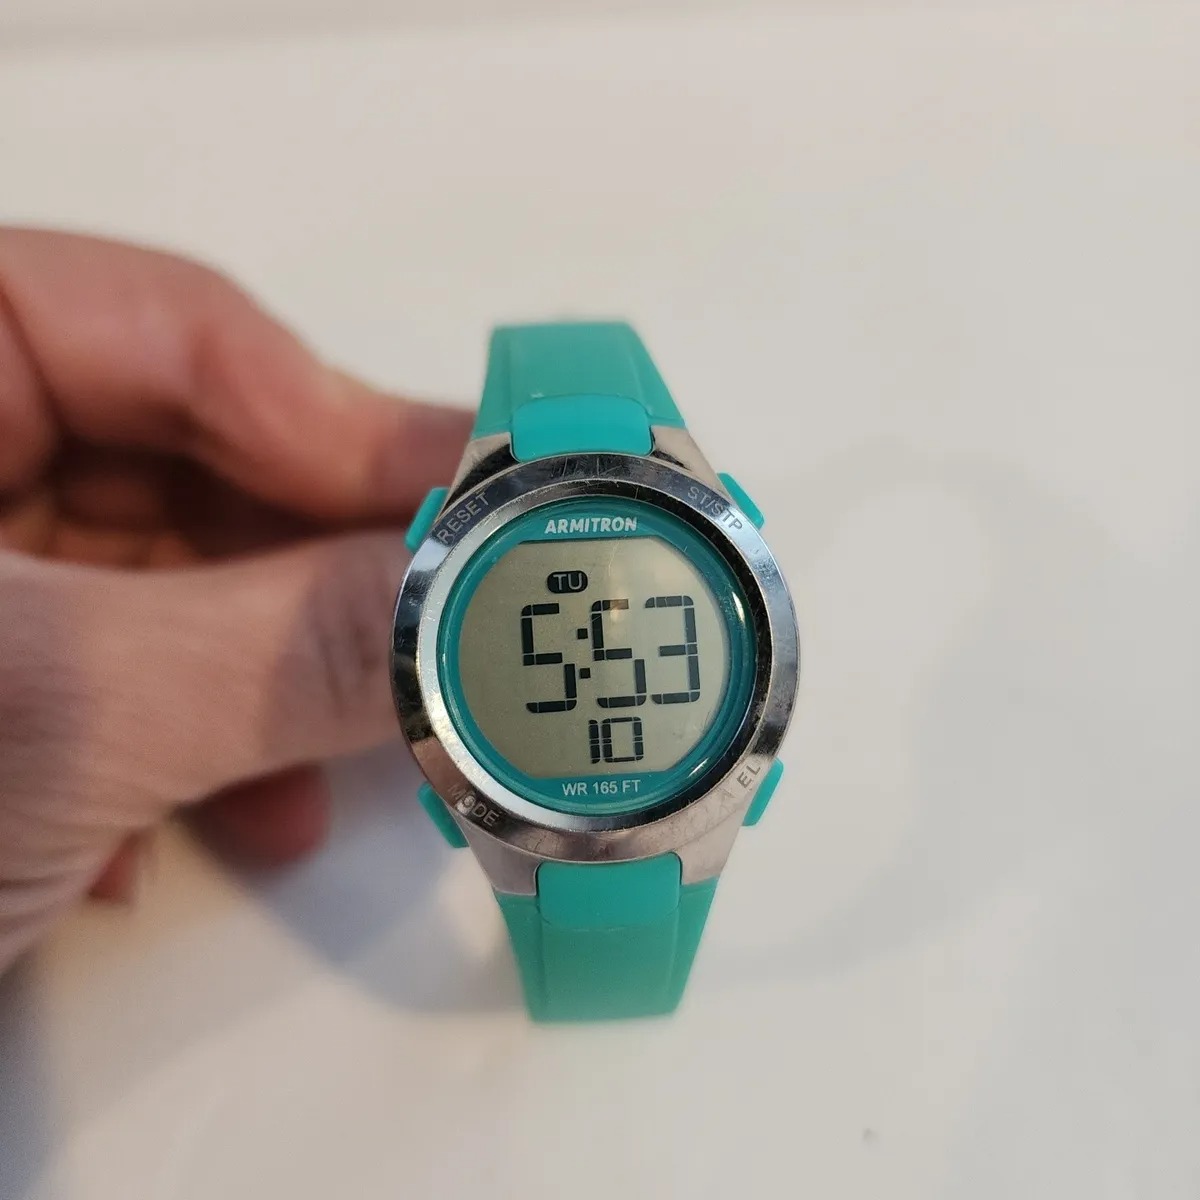 How To Turn The Alarm Off On A Digital Watch From Walmart